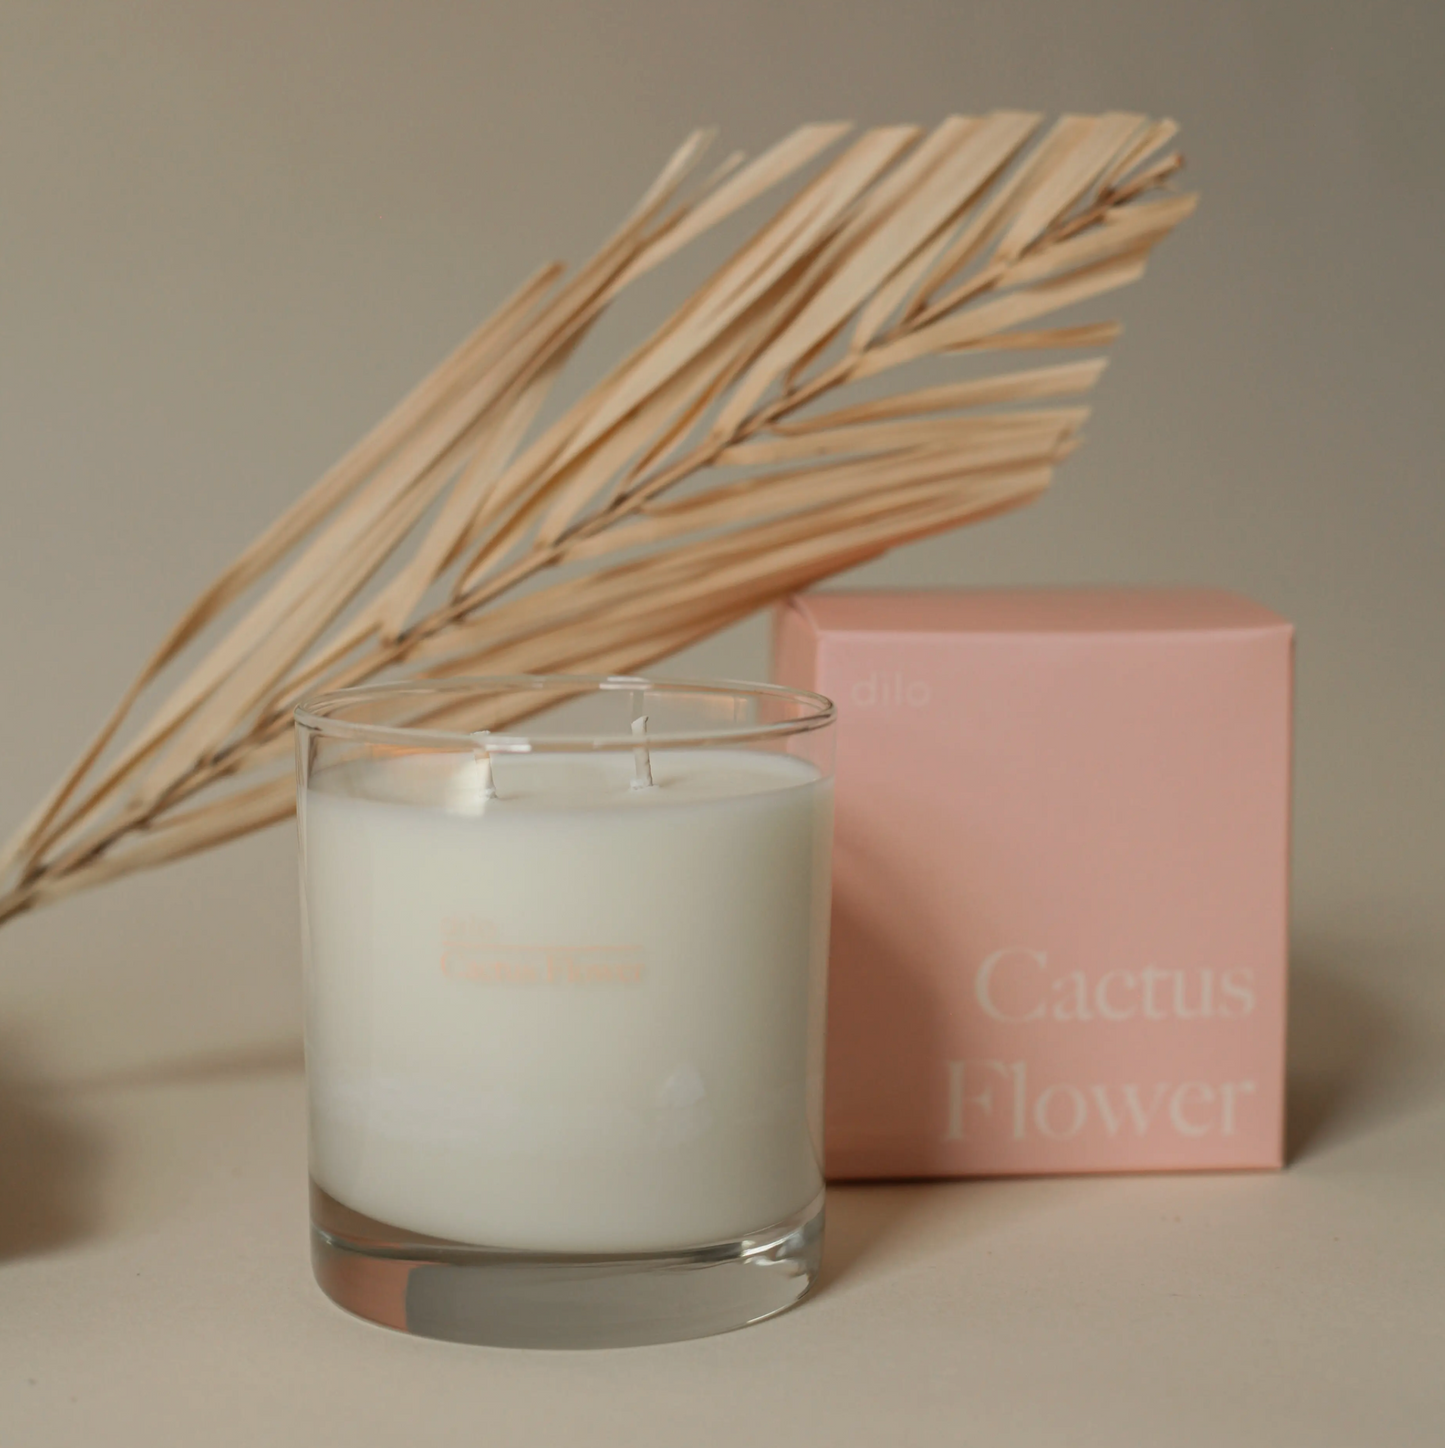 Dilo Cactus Flower Candle